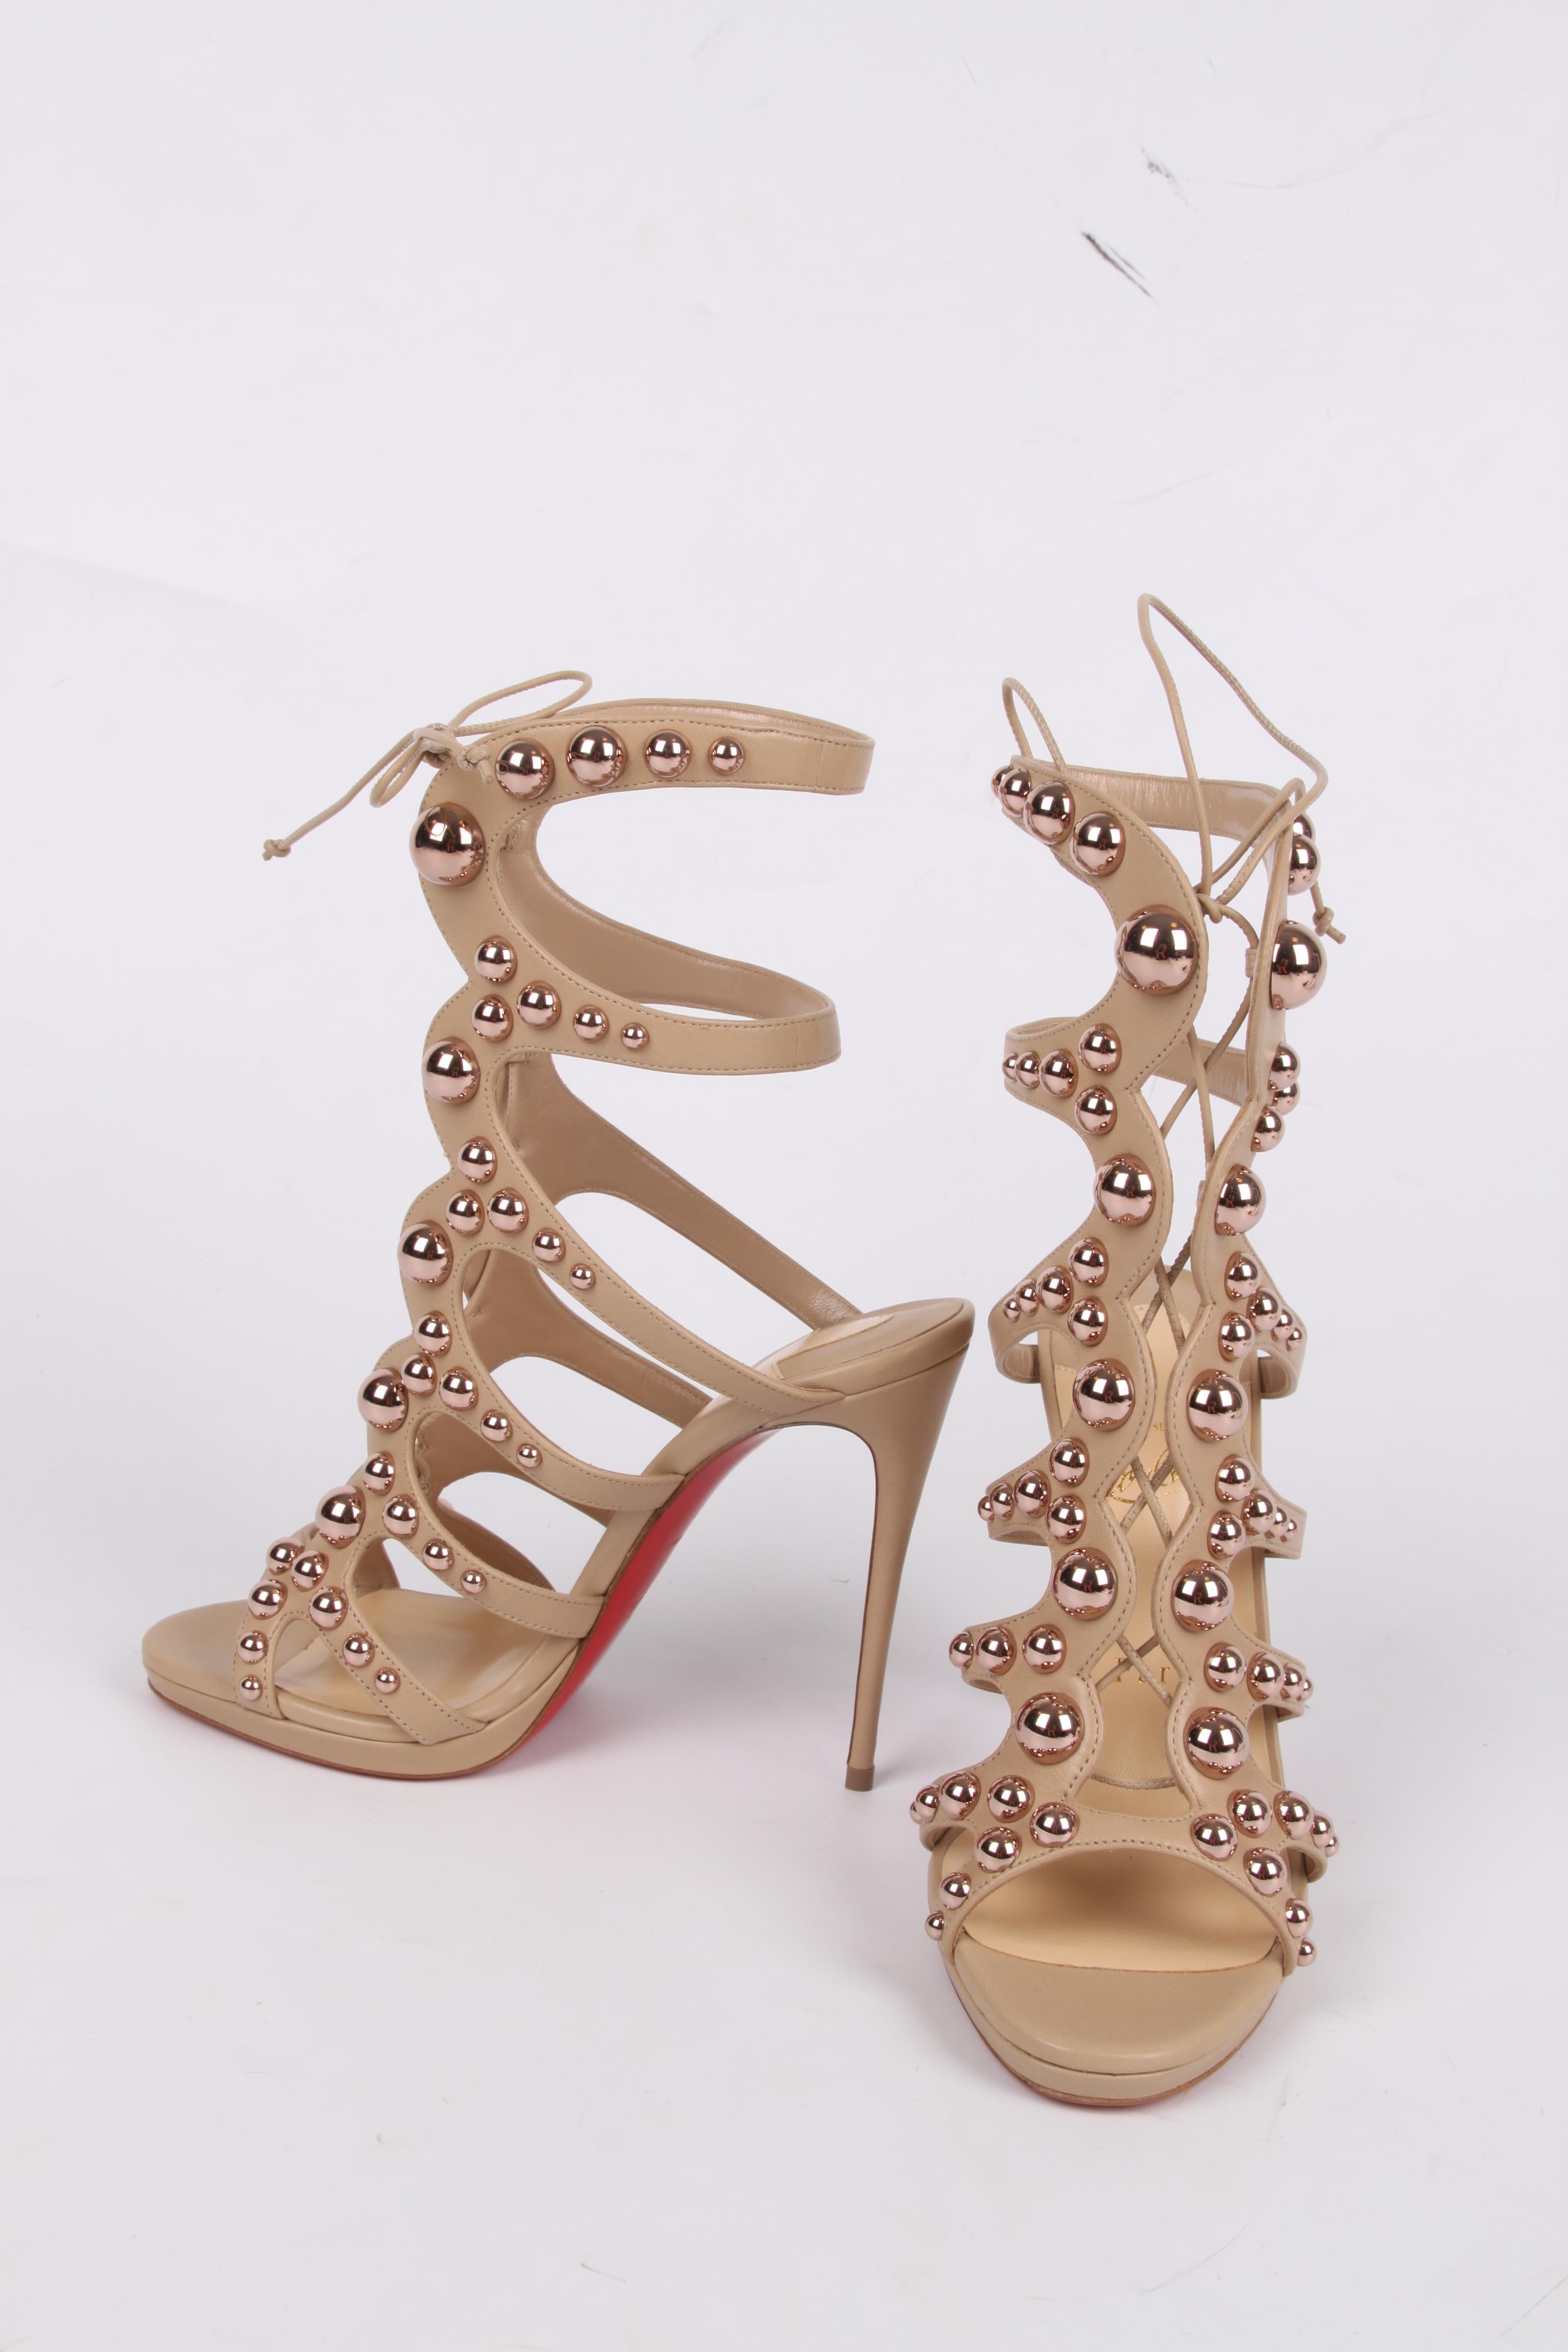 Louboutin Amazoubille Leather Stud Sandals - beige In New Condition For Sale In Baarn, NL